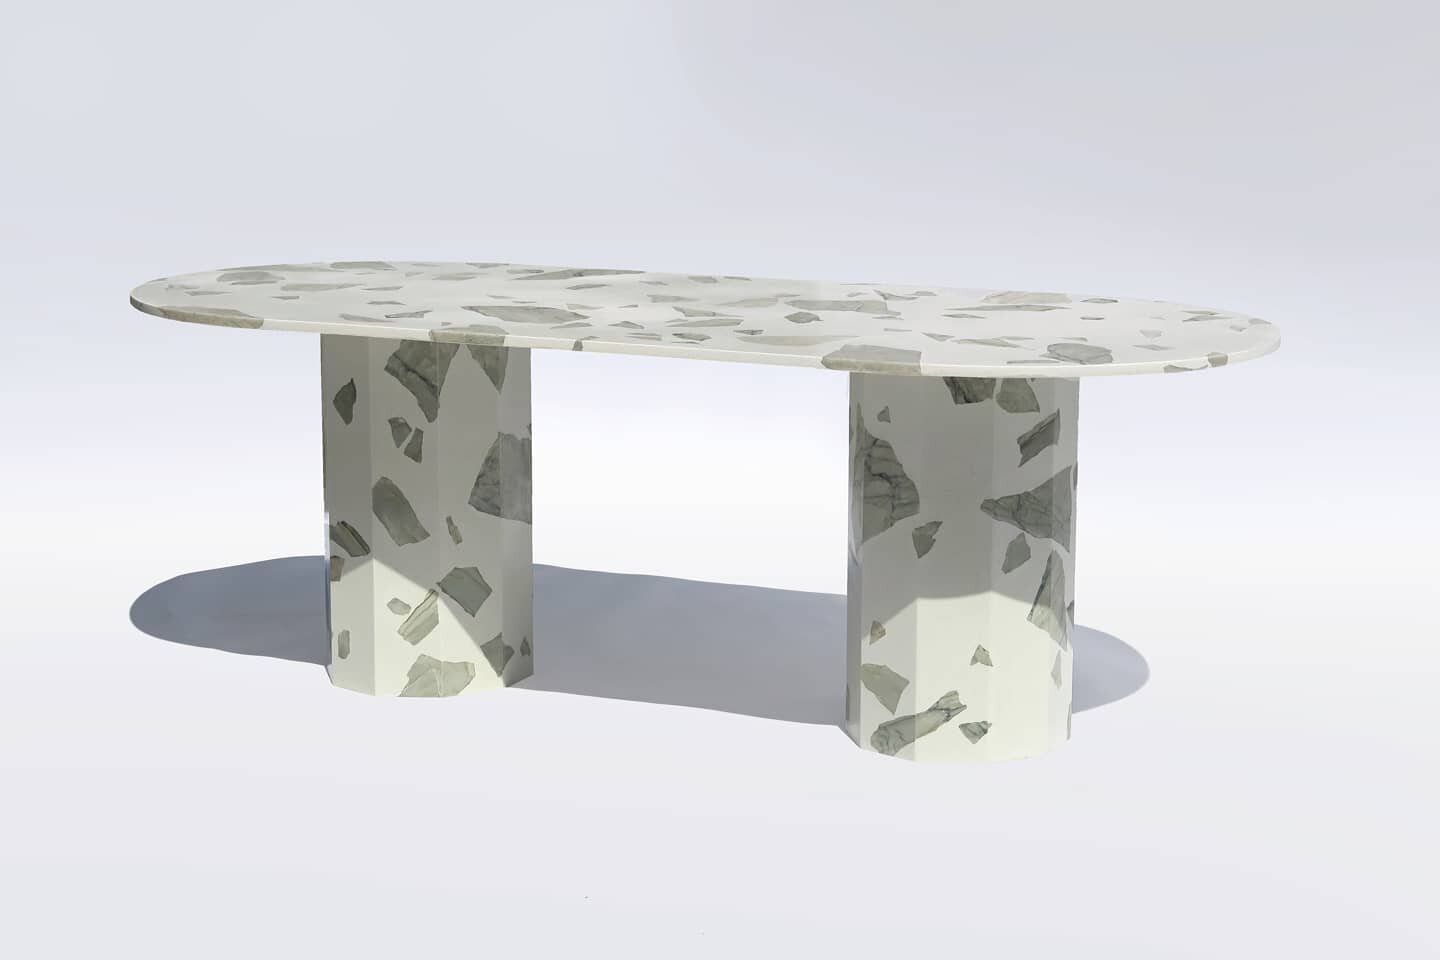 The pill shaped 6 seater dining table in Toblerone quartzite on white. Limited edition piece for sale - Link in bio for enquiries.
.
.
.
#altrock #altrocksurfaces #terrazzo #terrwzzotable #terrazzofurniture #toblerone #quartzite #limitededition